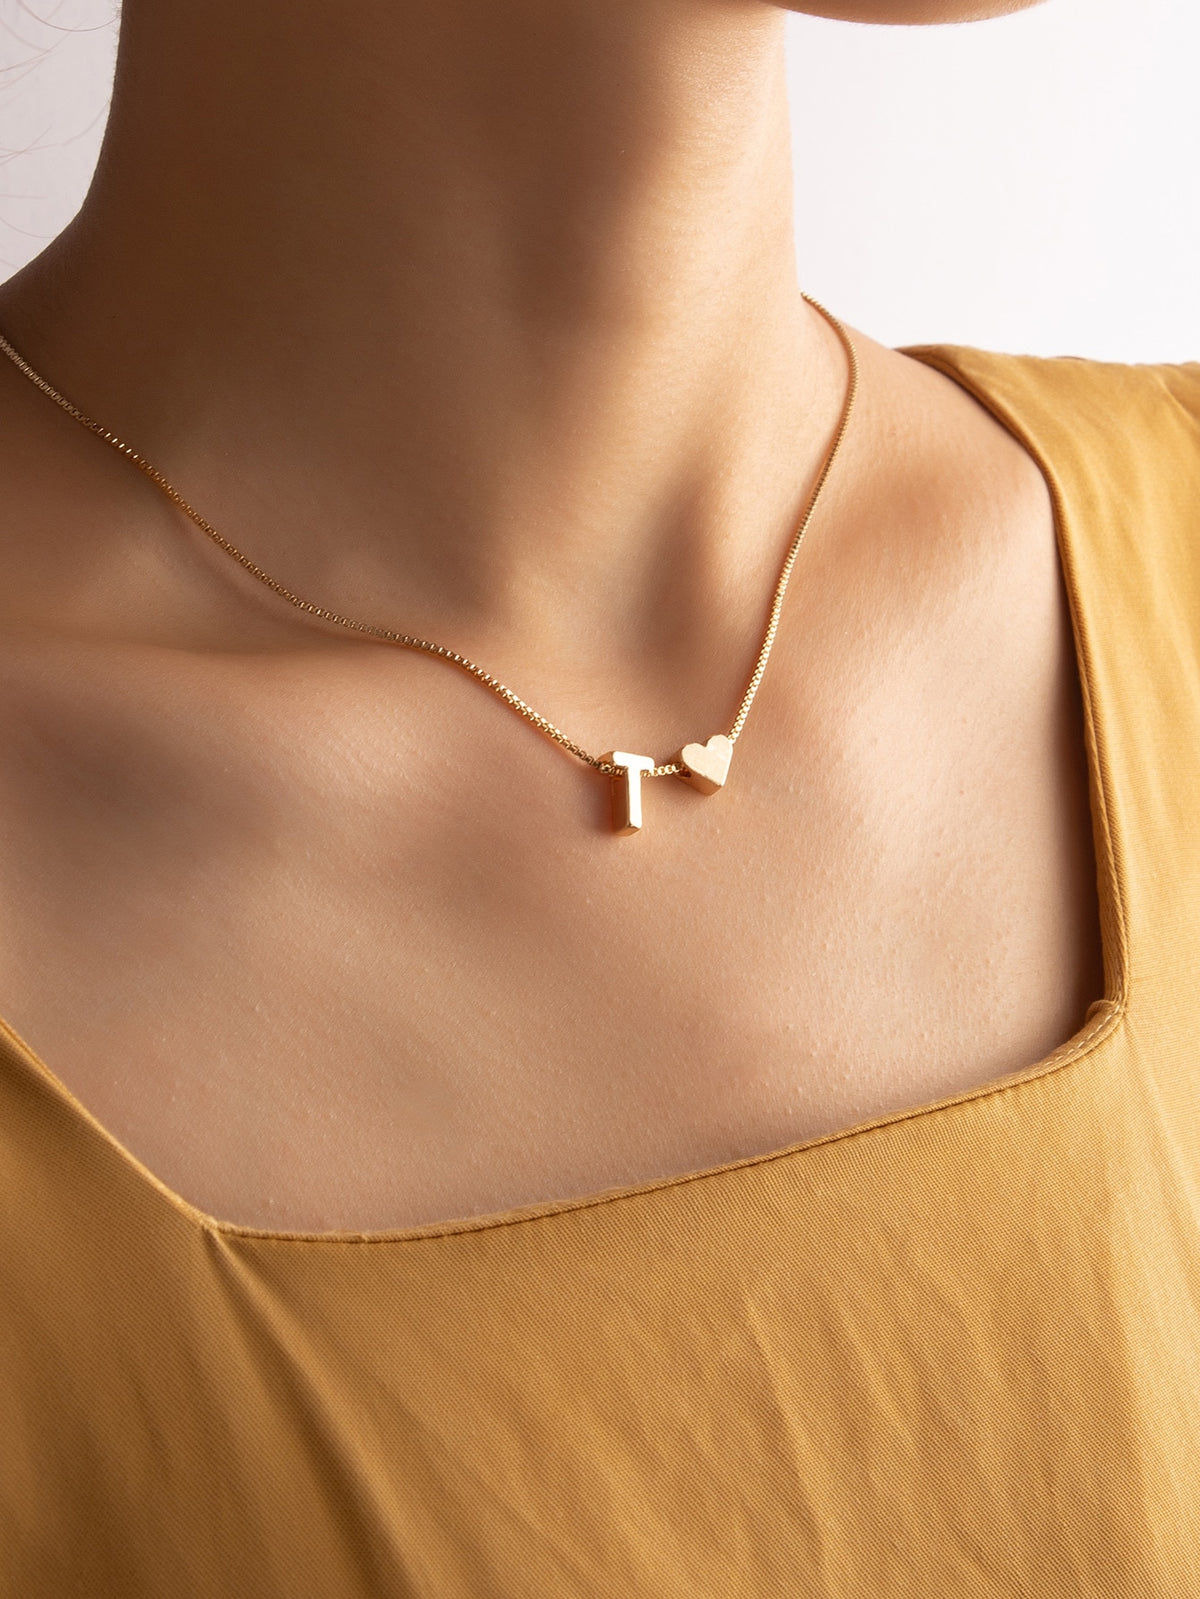 Arzonai Alphabet With Tiny Heart Neckalce for Women and Girls